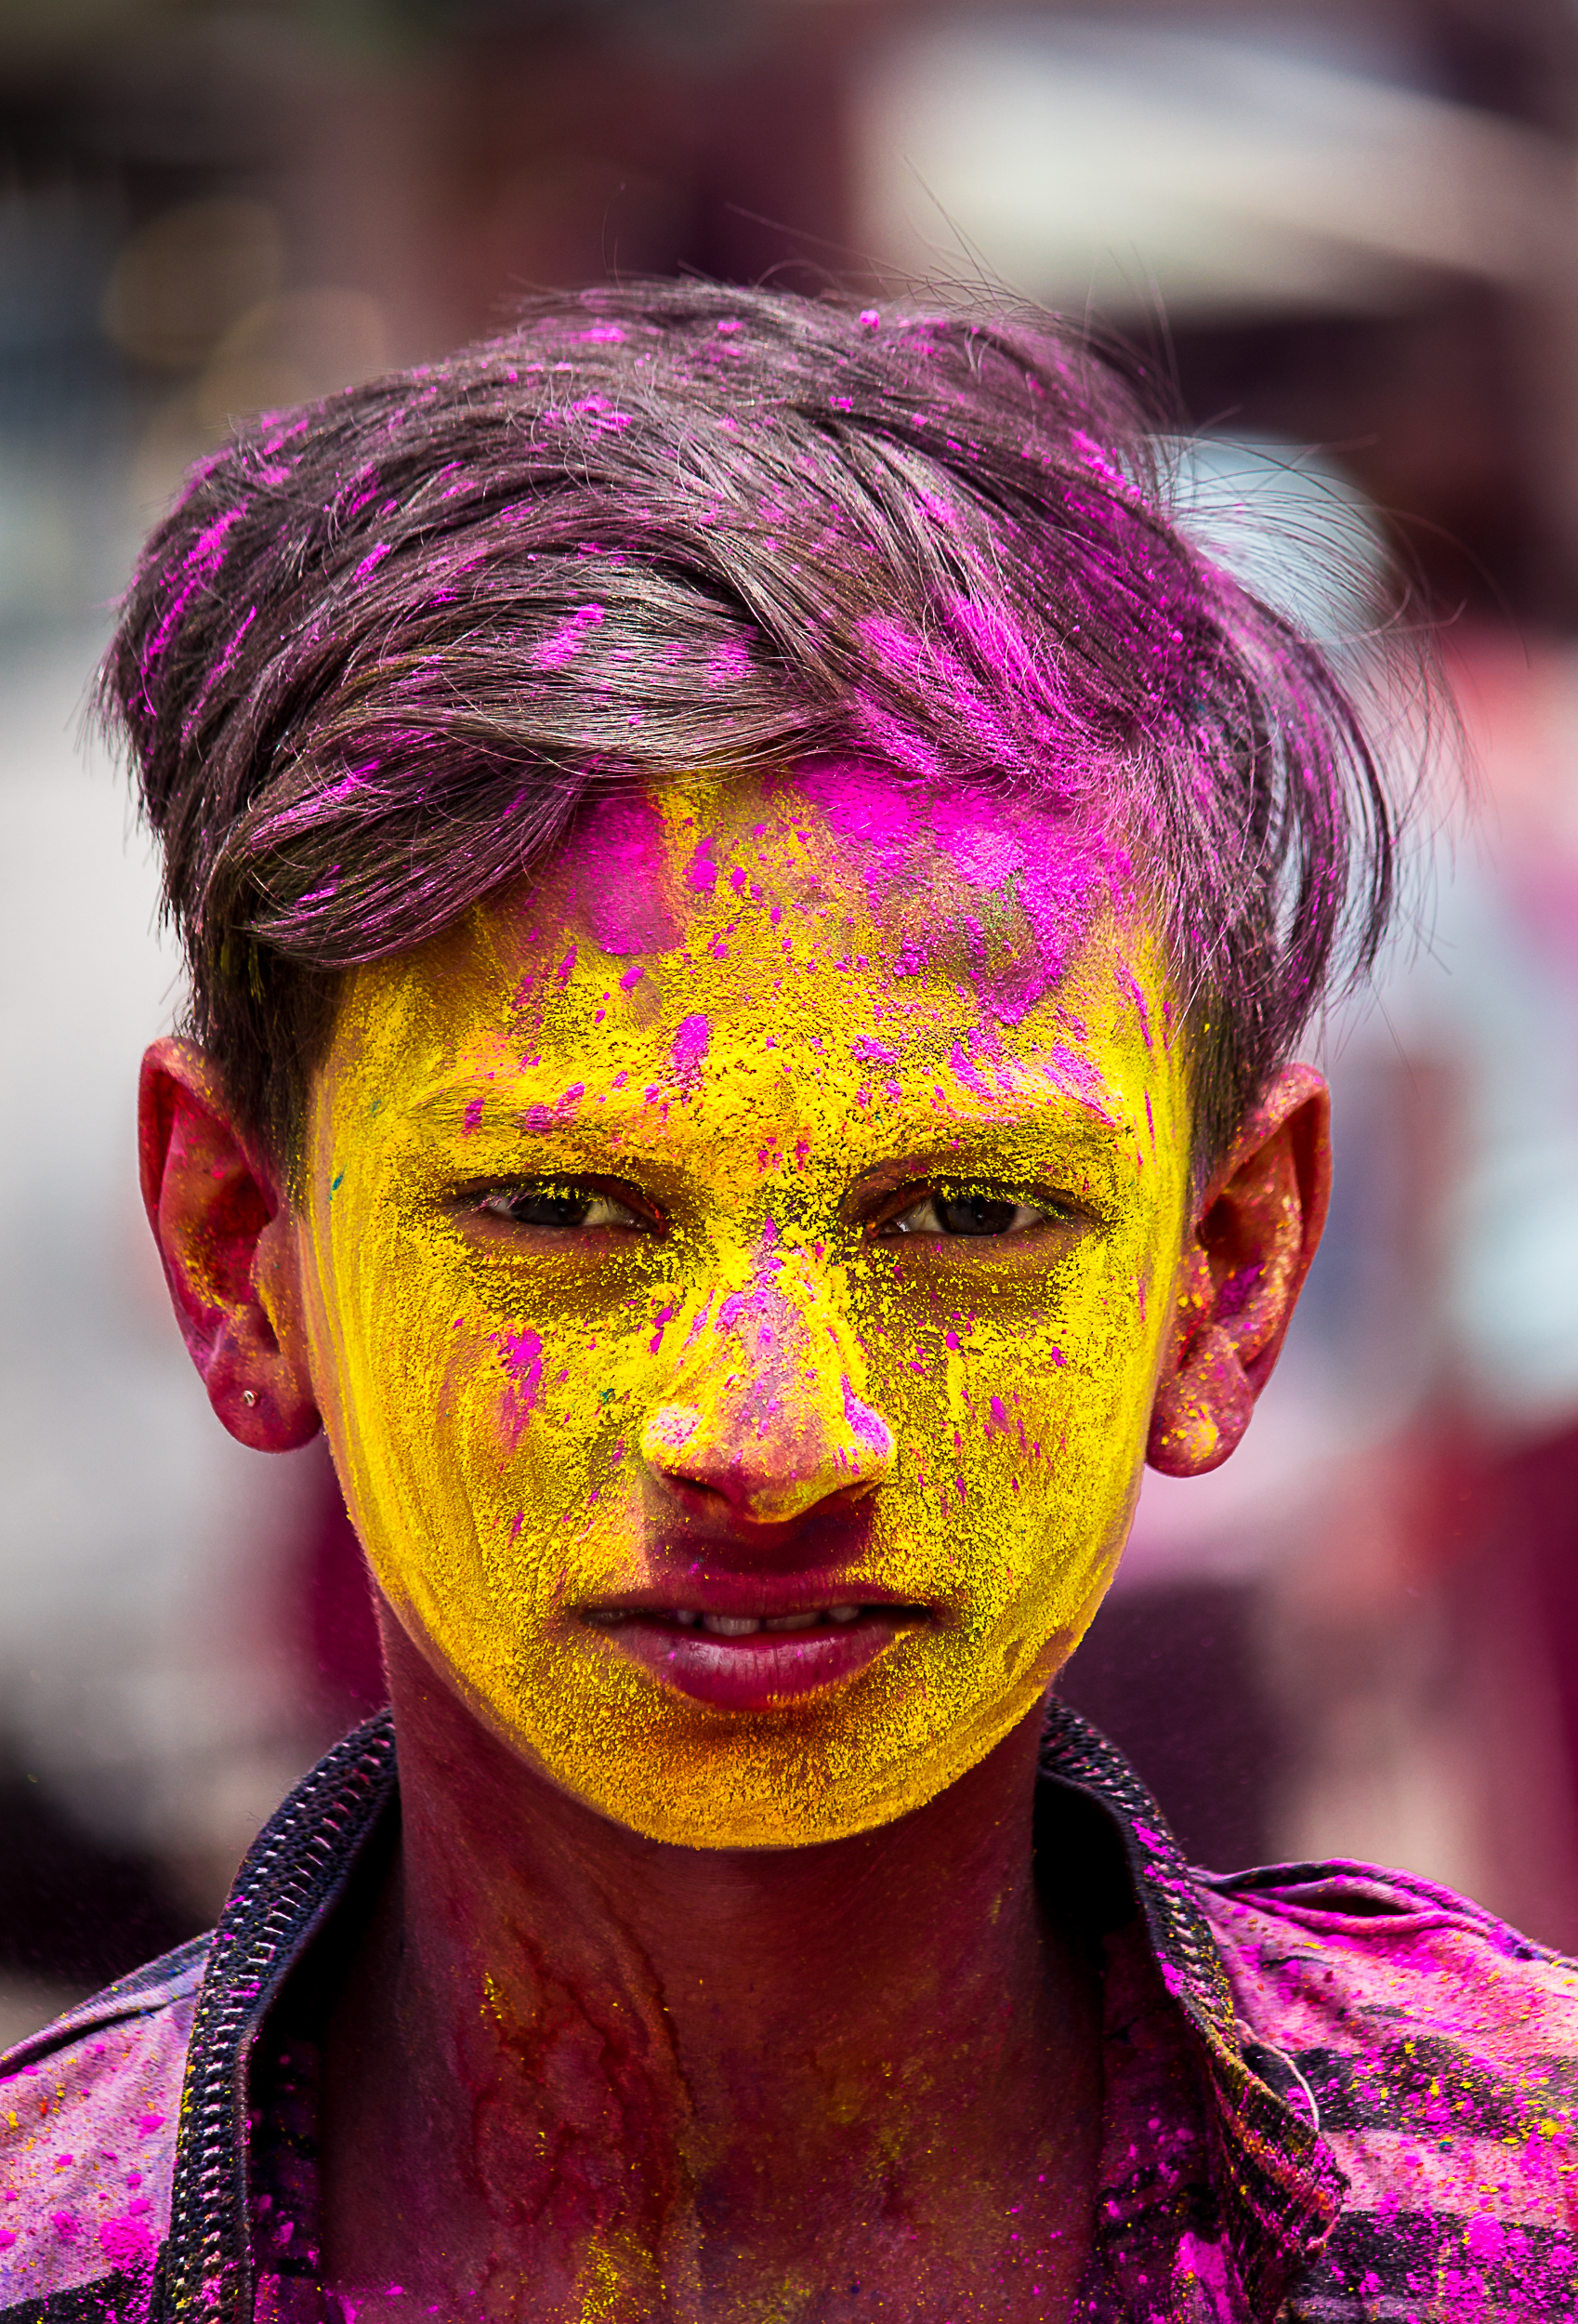 A boy's face painted with Holi colors